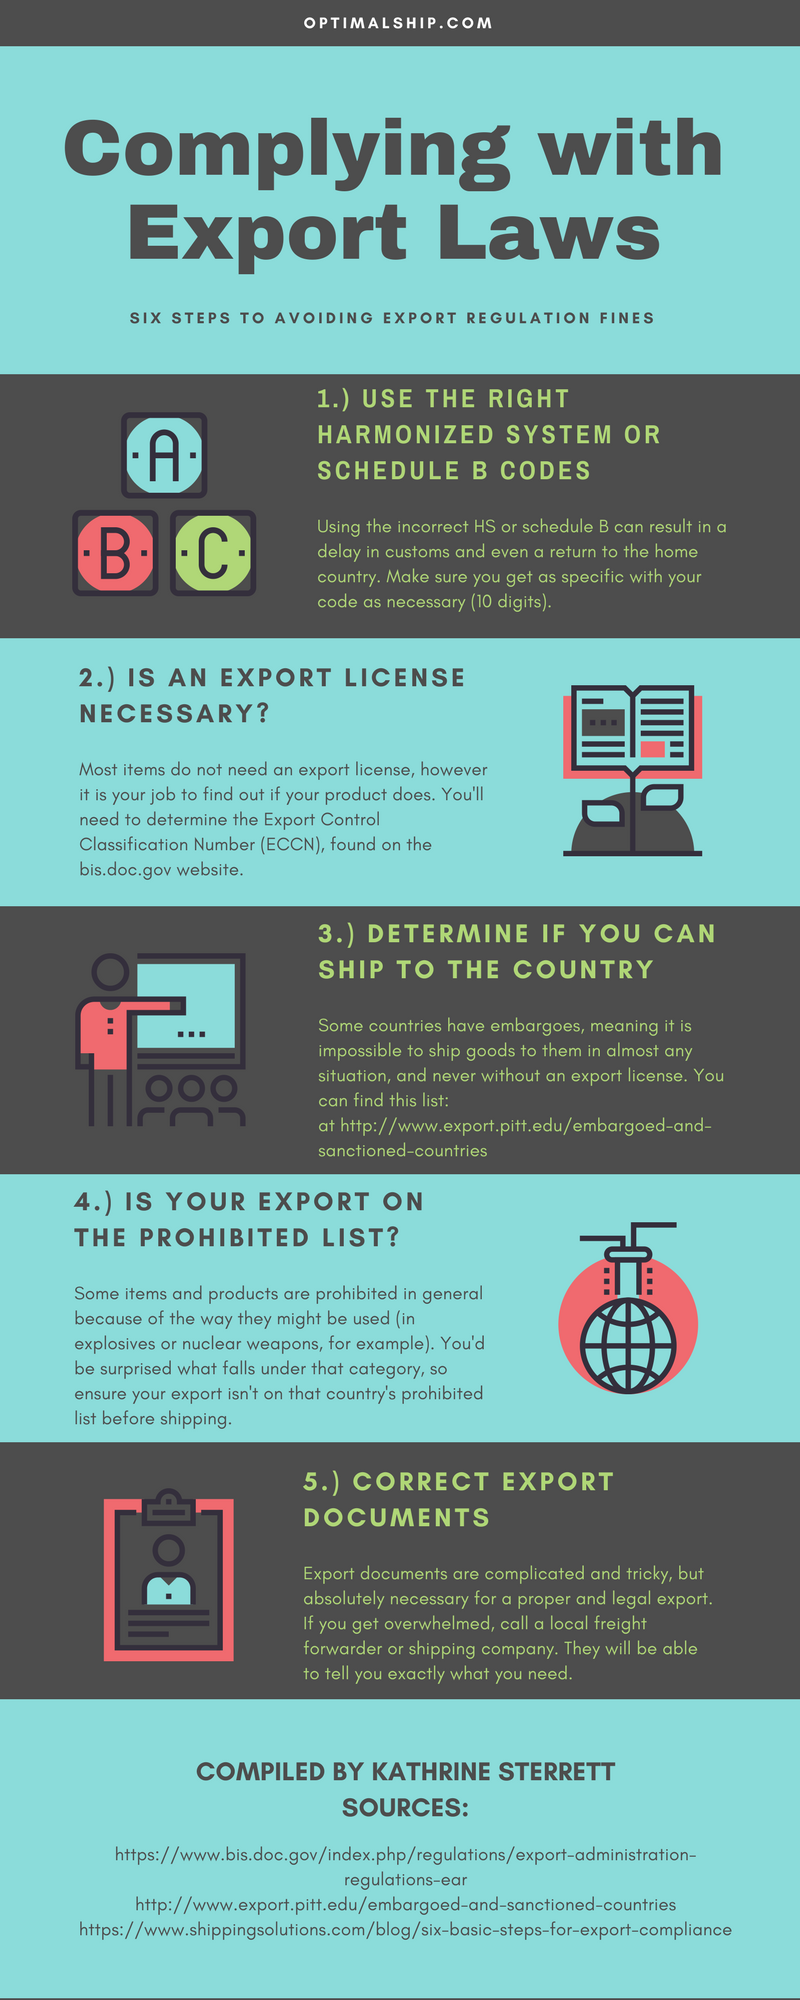 How to Comply with Export Laws (infographic)